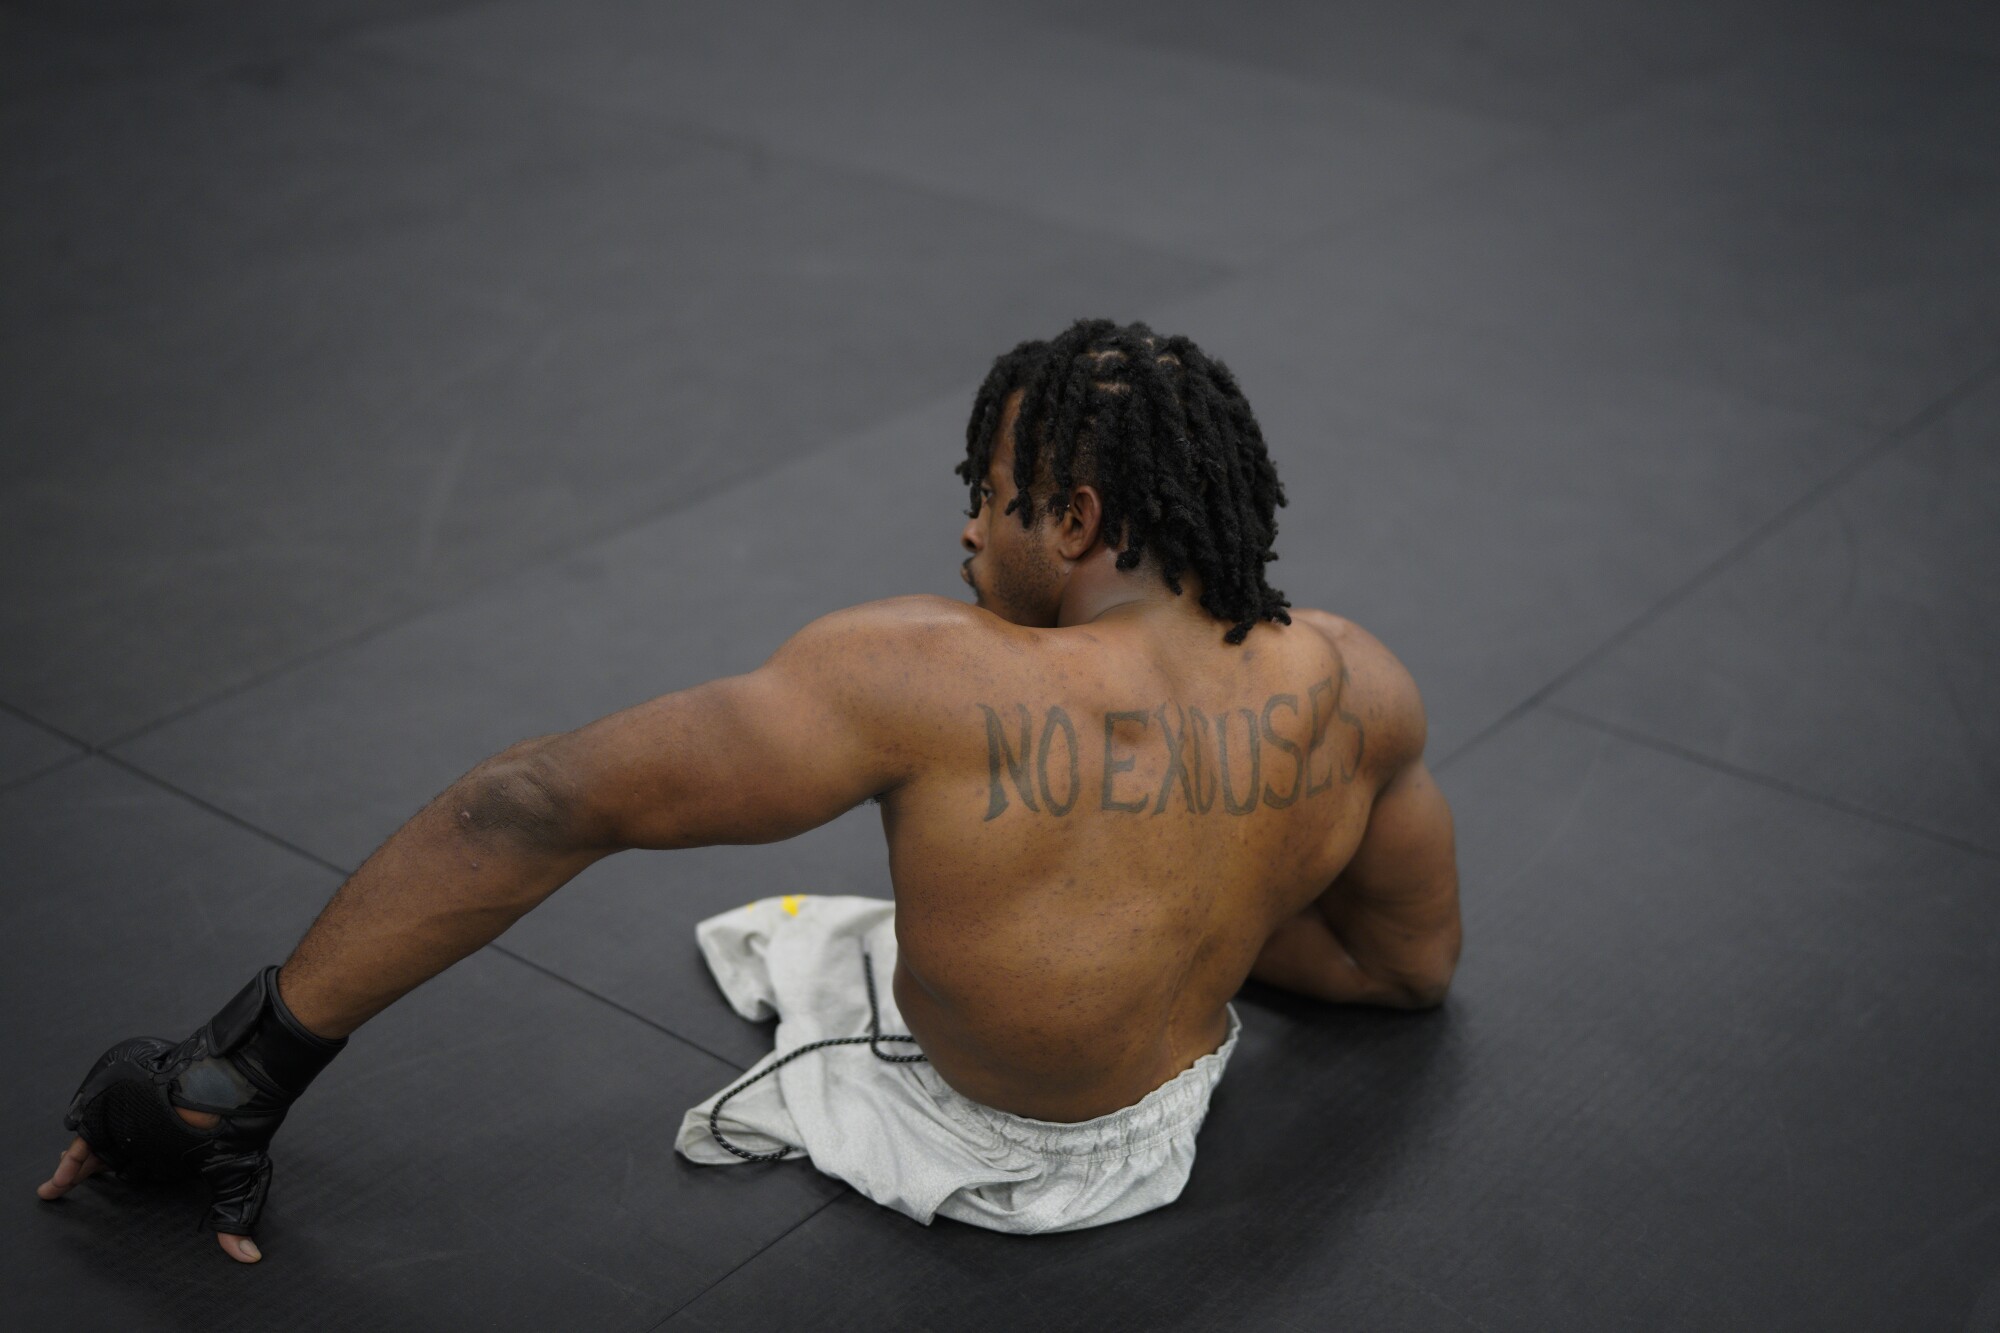 Zion Clark has the words "NO EXCUSES" tattooed on his back.  This is part of his philosophy of life without ever giving up.  